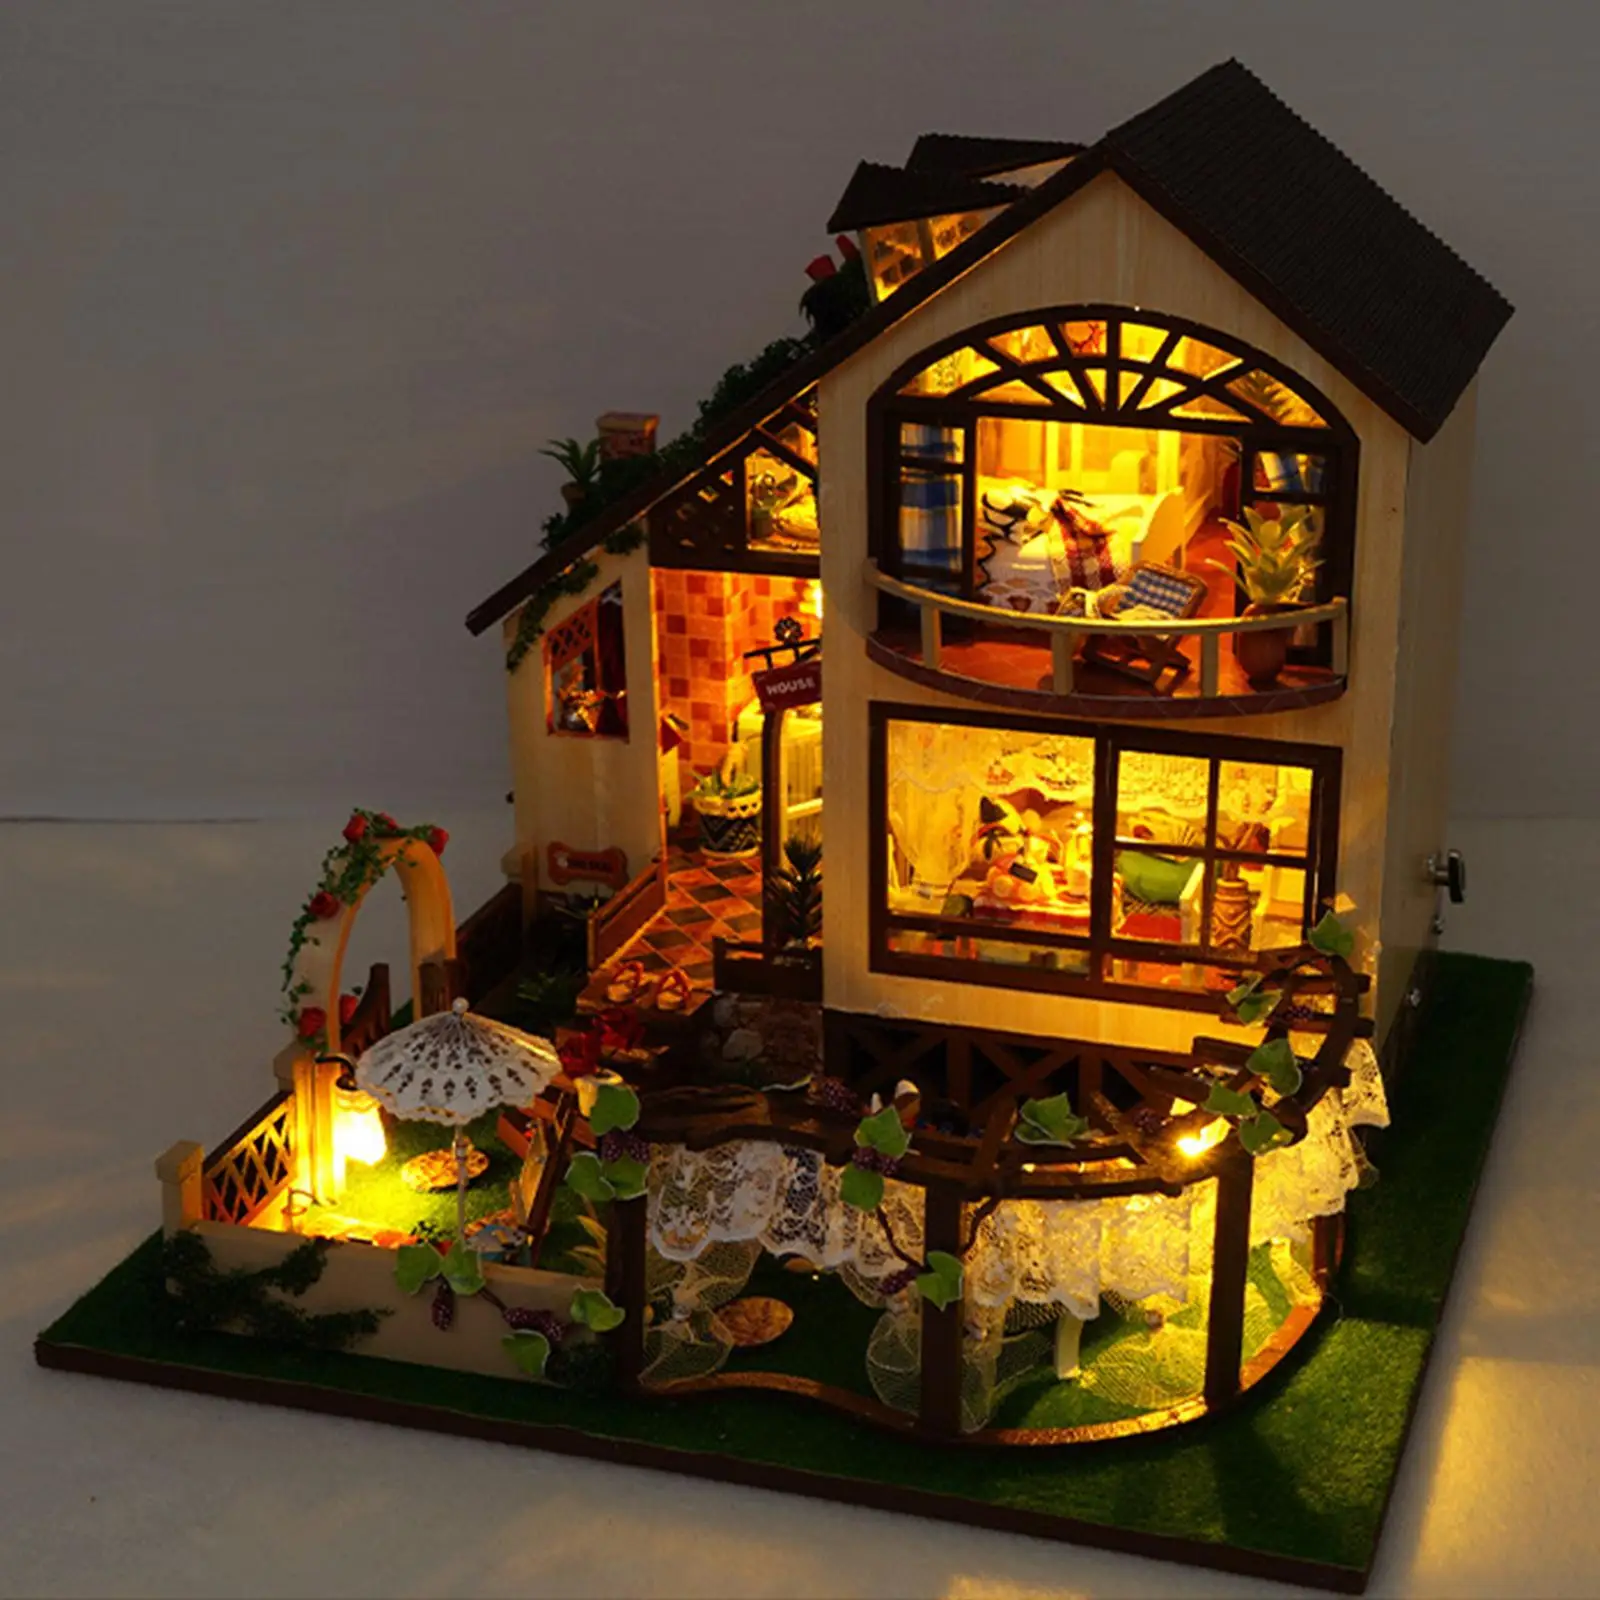 DIY Wooden Miniature Dollhouse DIY Crafts Home Decor Decorations Mini House Model 3D Puzzles for Kids Birthday Gift Friends